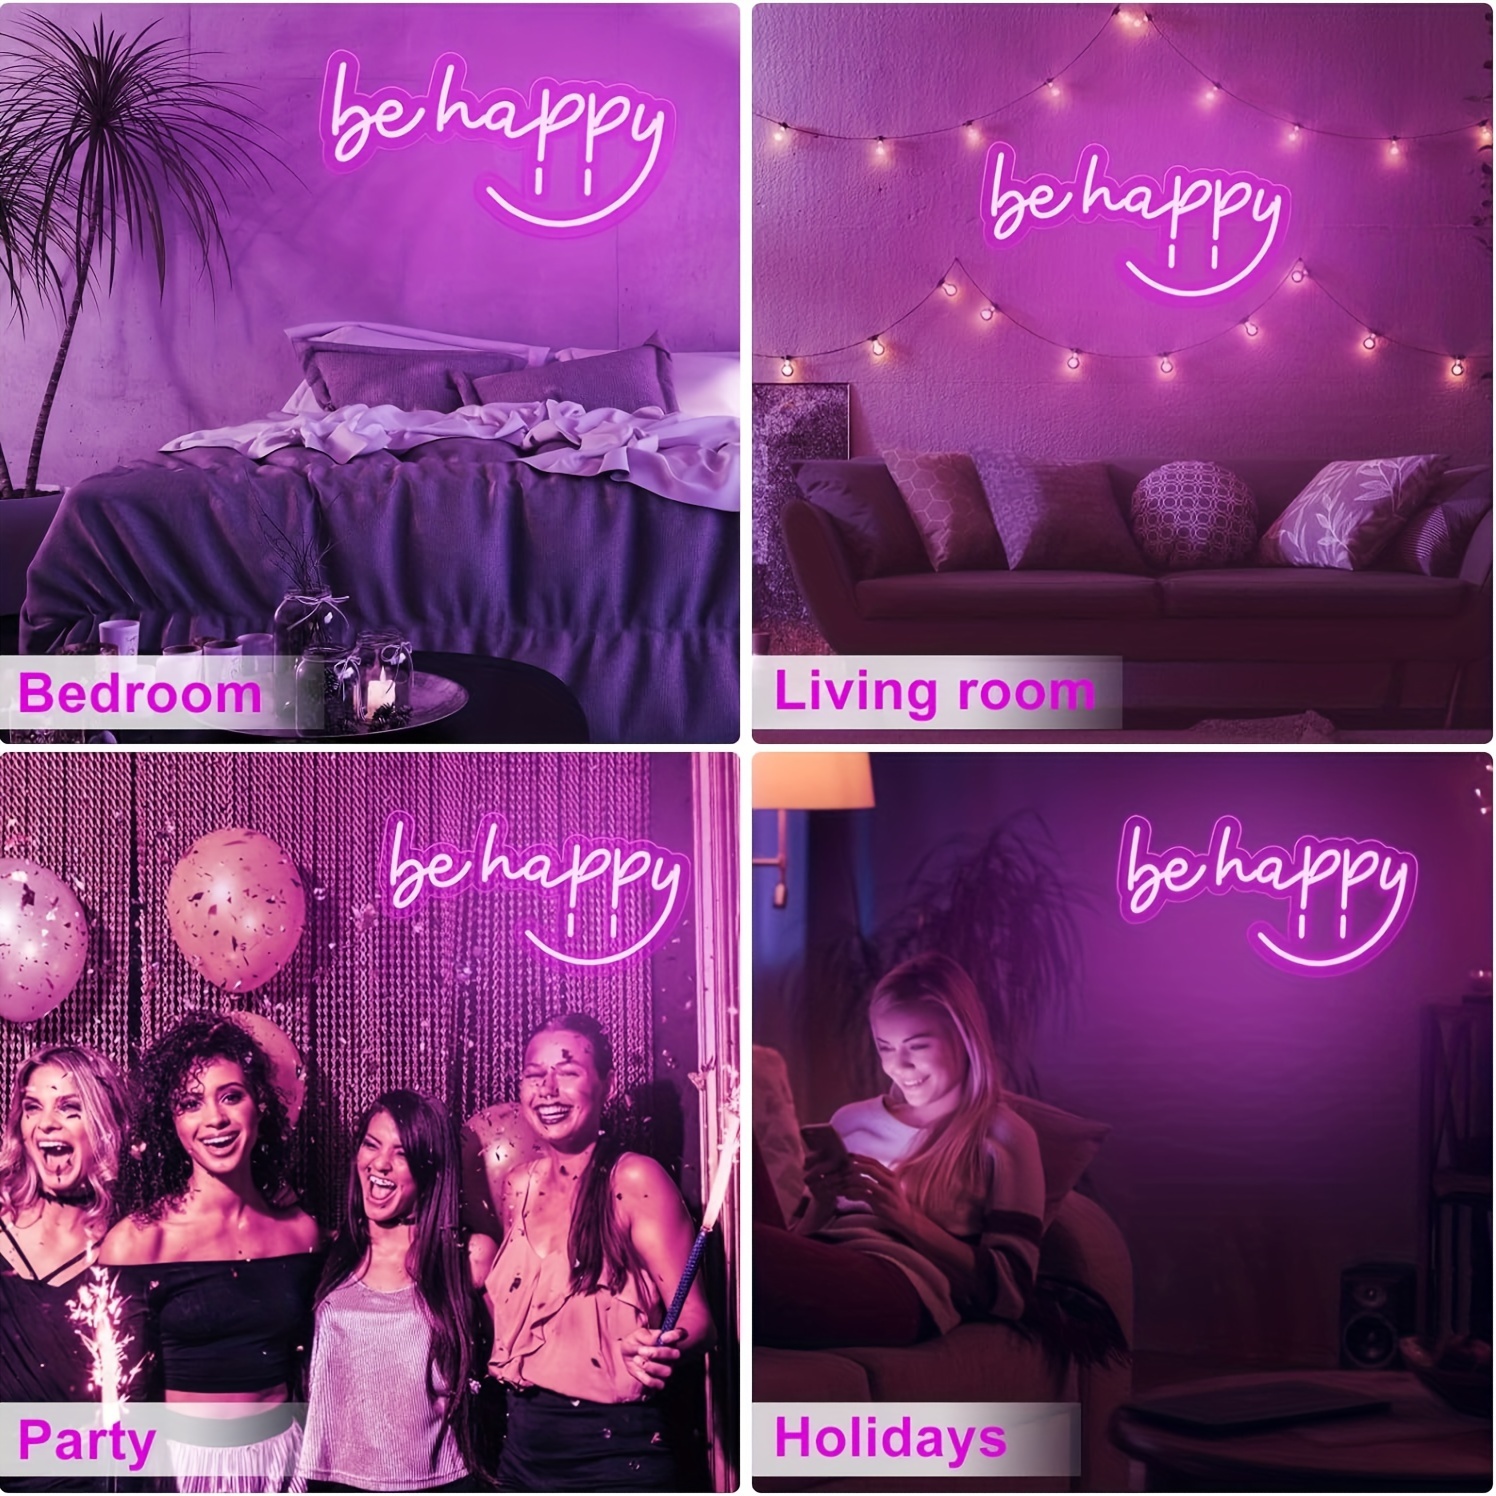 1pc be happy neon sign light letter room decoration neon sign light portable pink led sign party gift home bedroom wall decoration lights usb powered